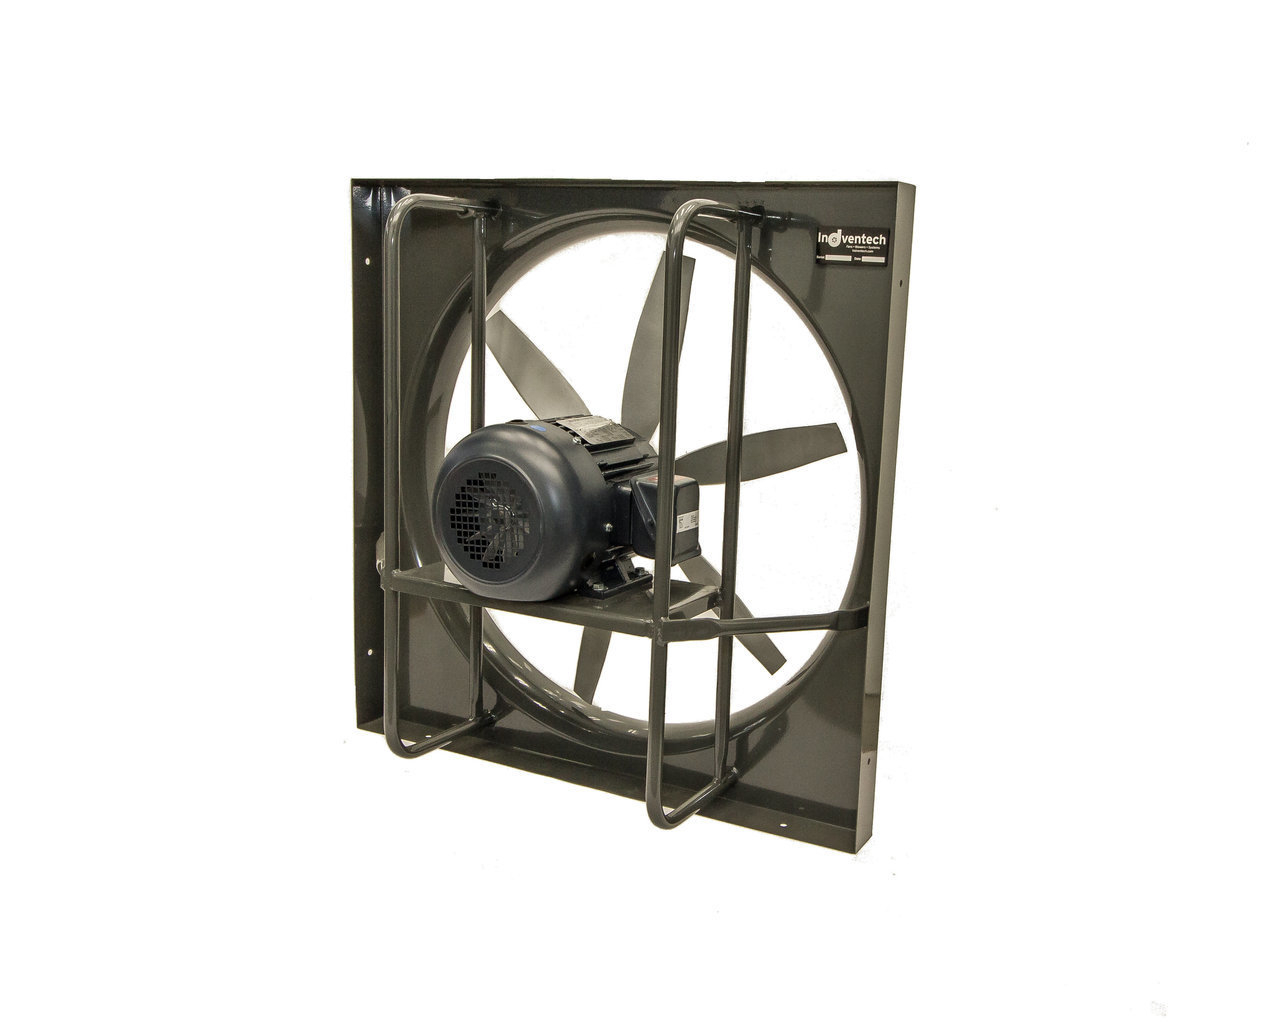 Drive Wall Exhaust Fan Manufacturer In United States intended for measurements 1280 X 1024